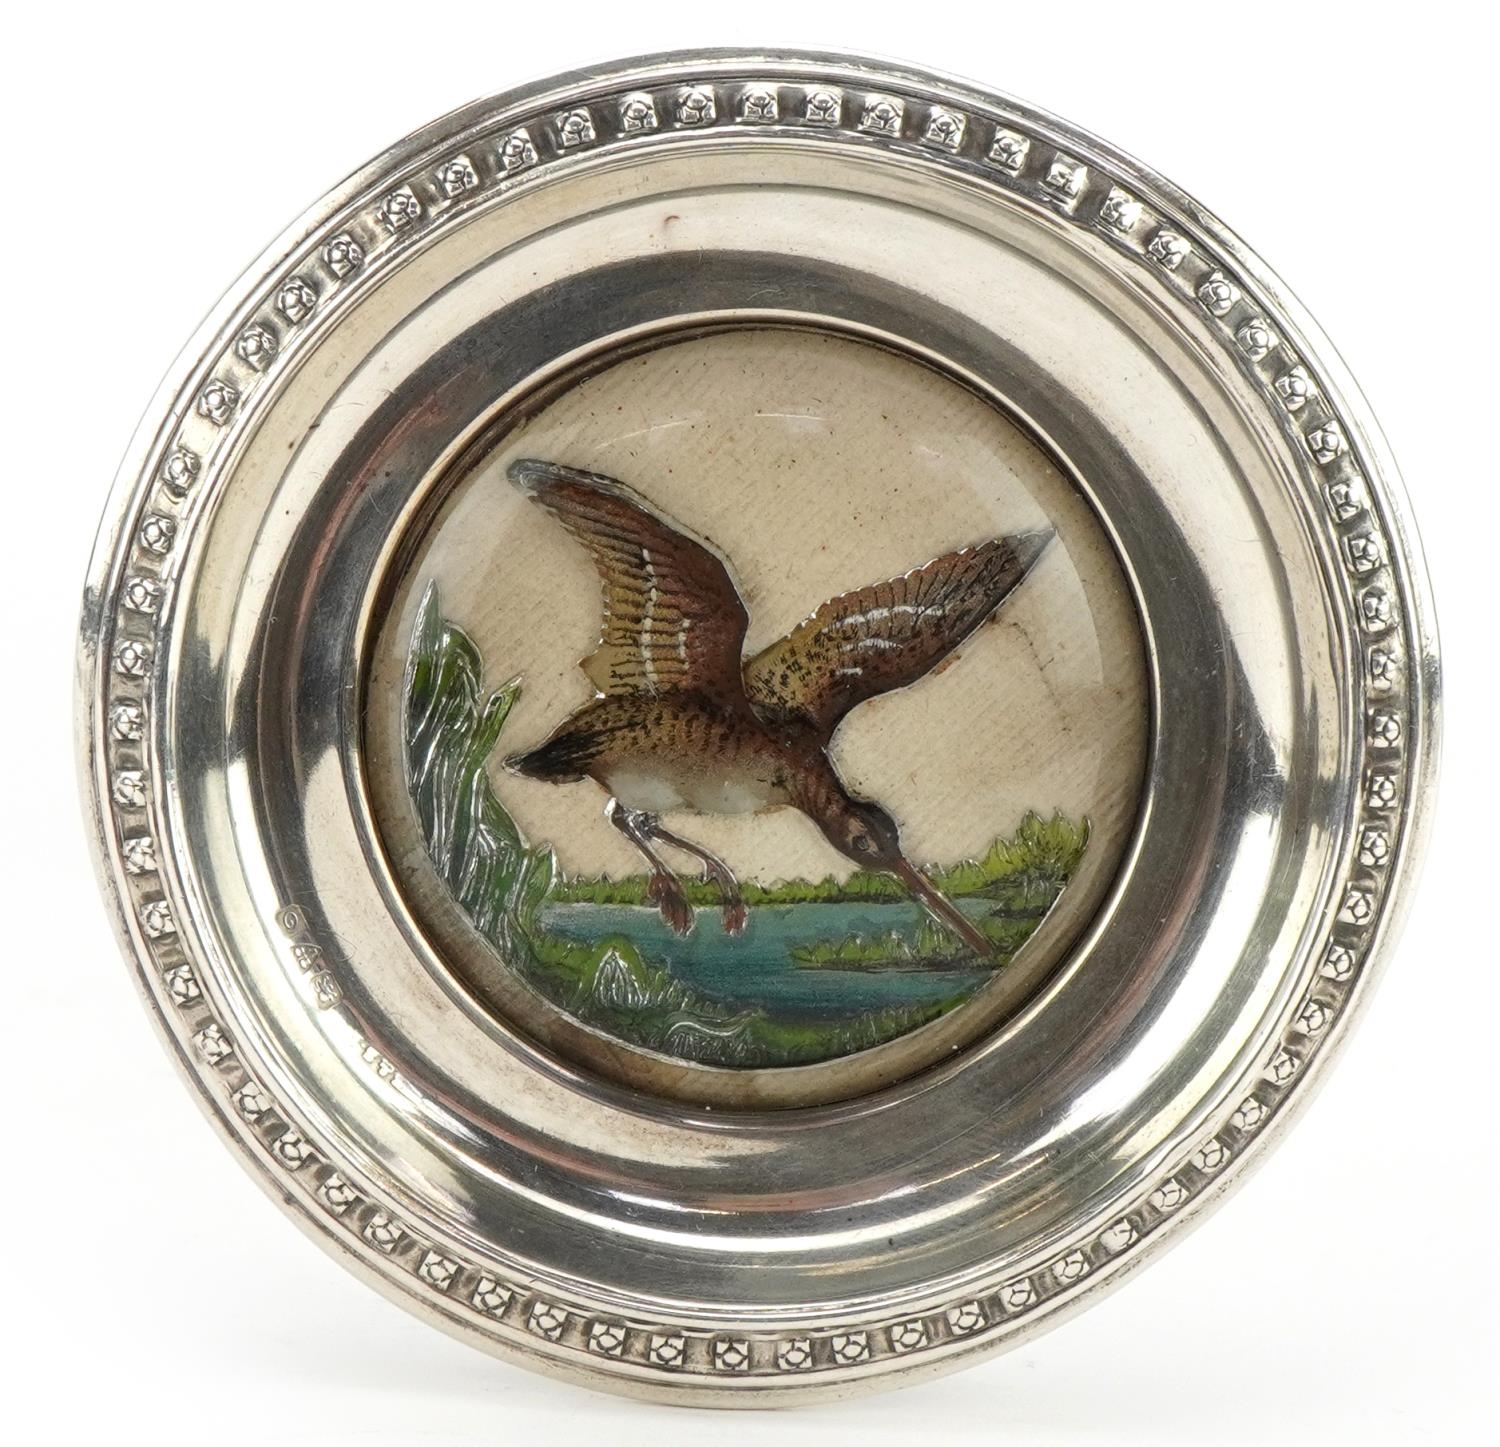 Silver Essex Crystal design pin dish decorated with a water bird in flight, Chester 1914, 8.5cm in